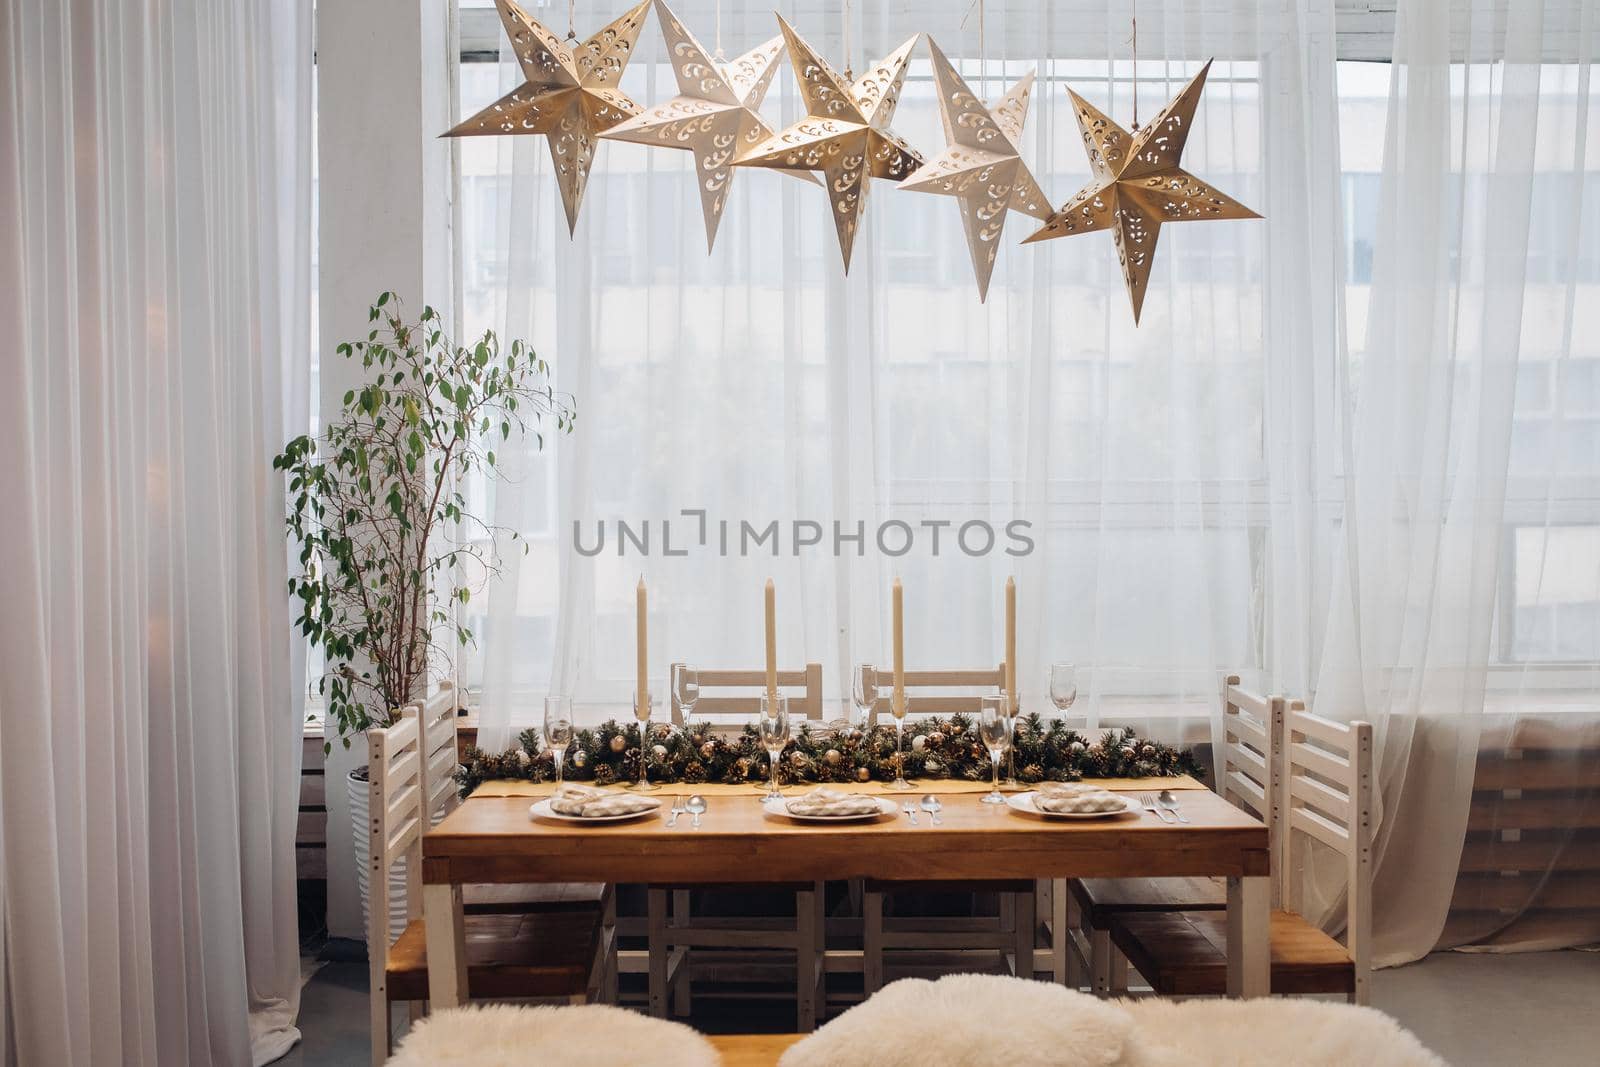 View over beautifully decorated dining table for six people with fir branch with pine cones in the middle of the table, served flutes and plates. Five decorative lamps in shape of stars over the table. Christmas dinner concept.